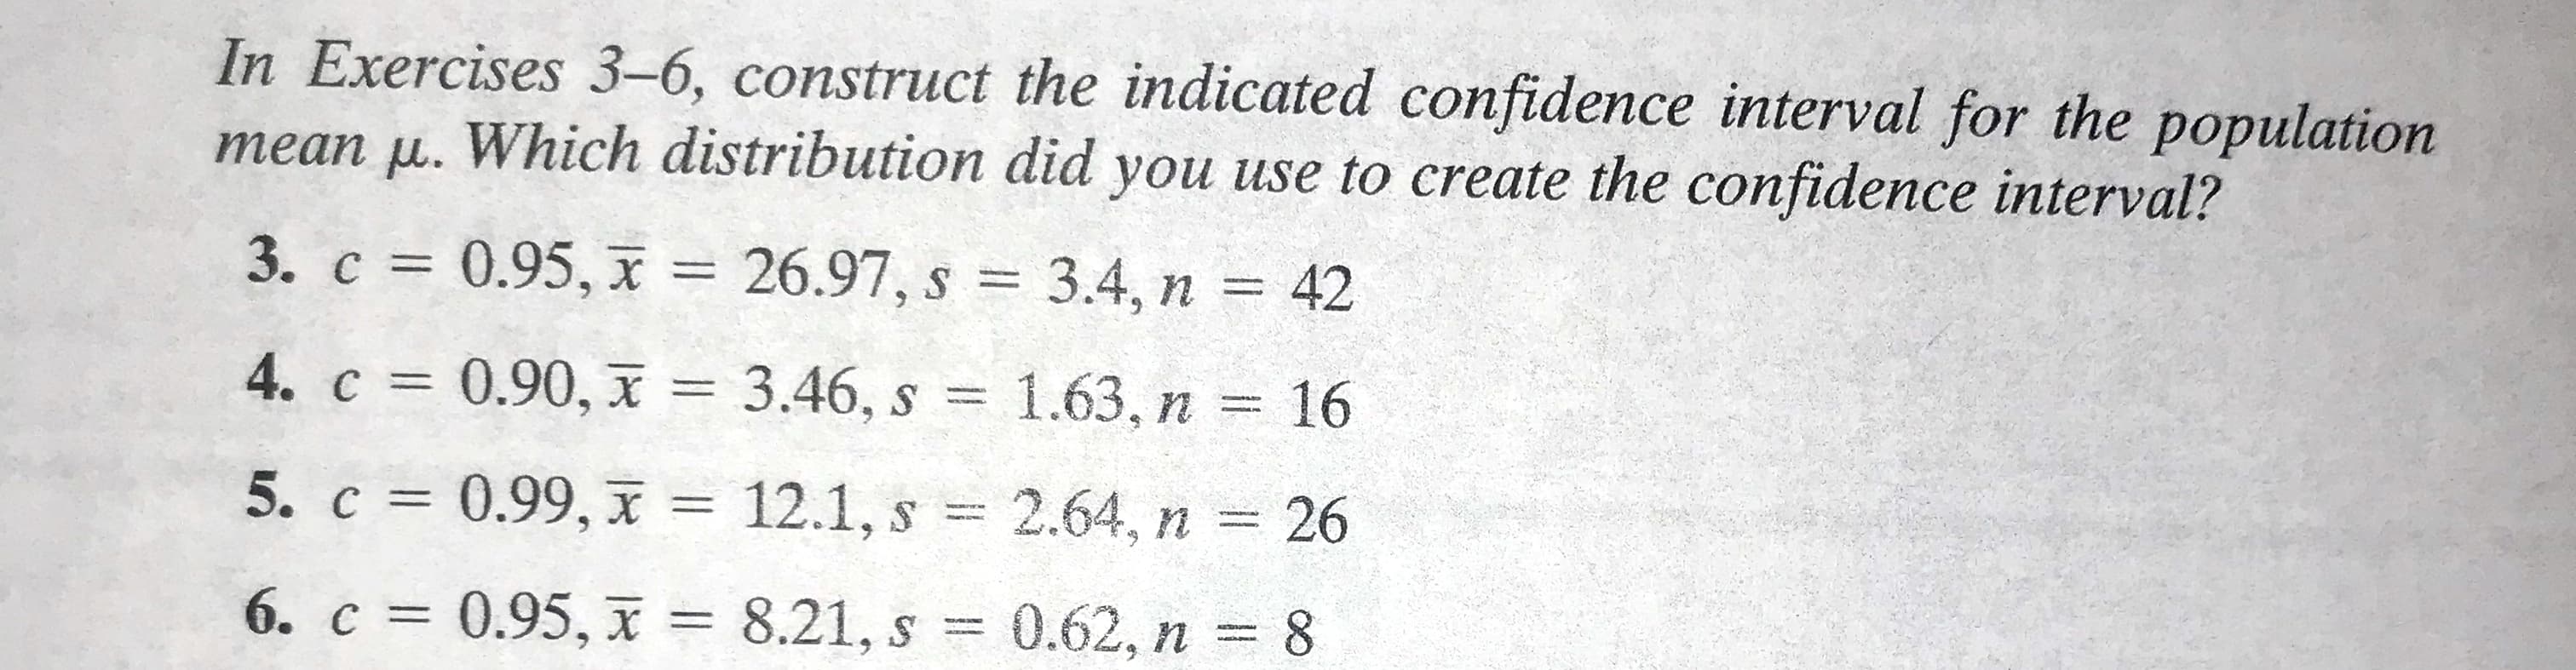 In Exercises 3–6, construct the indicated confidence interval for the population
mean u. Which distribution did you use to create the confidence interval?
3. c = 0.95, x = 26.97, s = 3.4, n = 42
%3D
%3D
4. c = 0.90, x = 3.46, s =
1.63, n = 16
%3D
5. c = 0.99, I = 12.1, s
2.64, n
26
%3D
6. c = 0.95, x = 8.21, s
0.62, n
